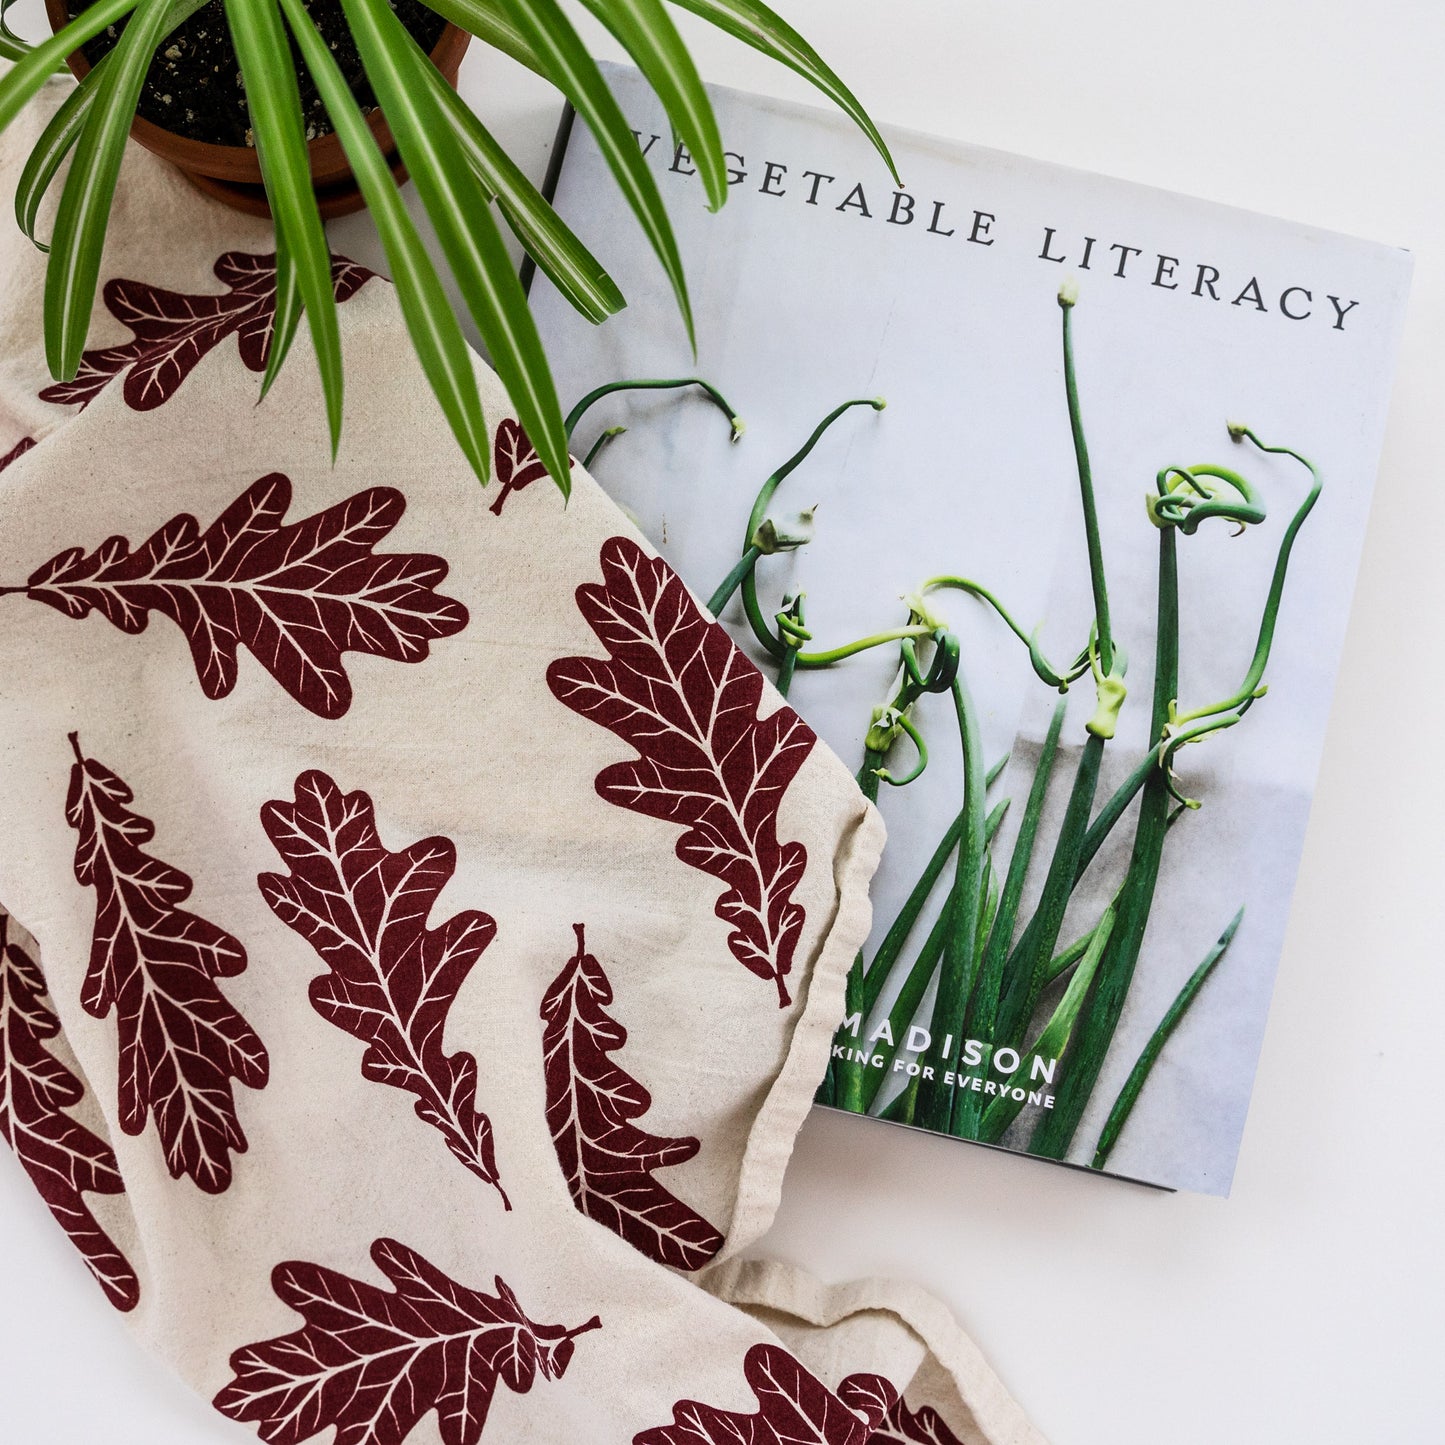 Oak leaf tea towel with cook book and potted plant